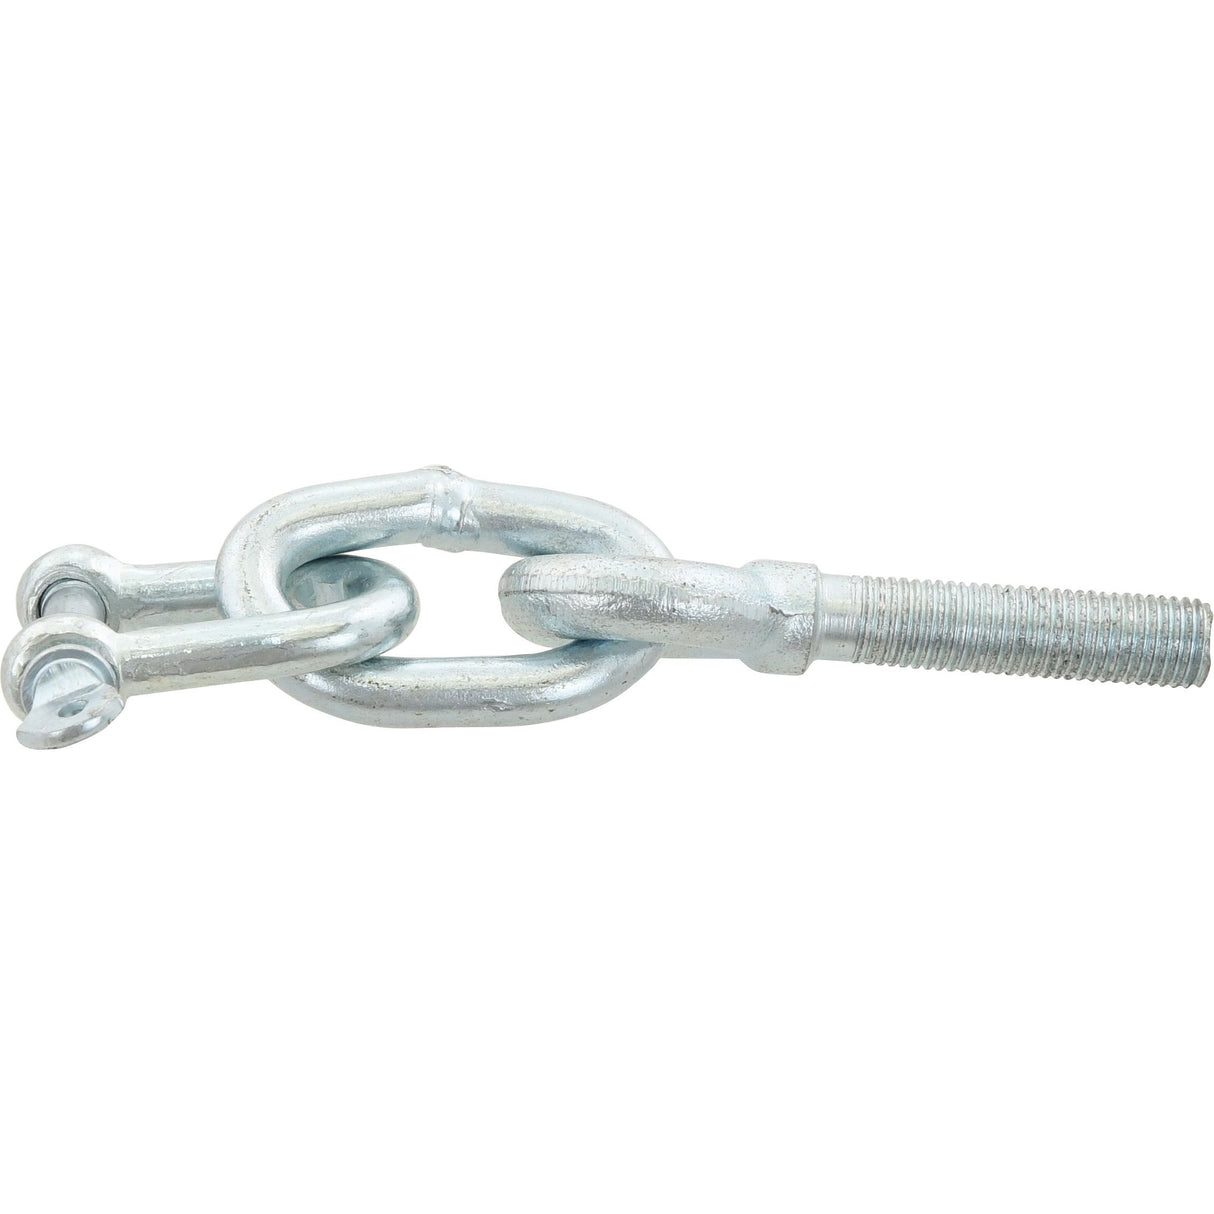 Check Chain Assembly
 - S.62497 - Farming Parts